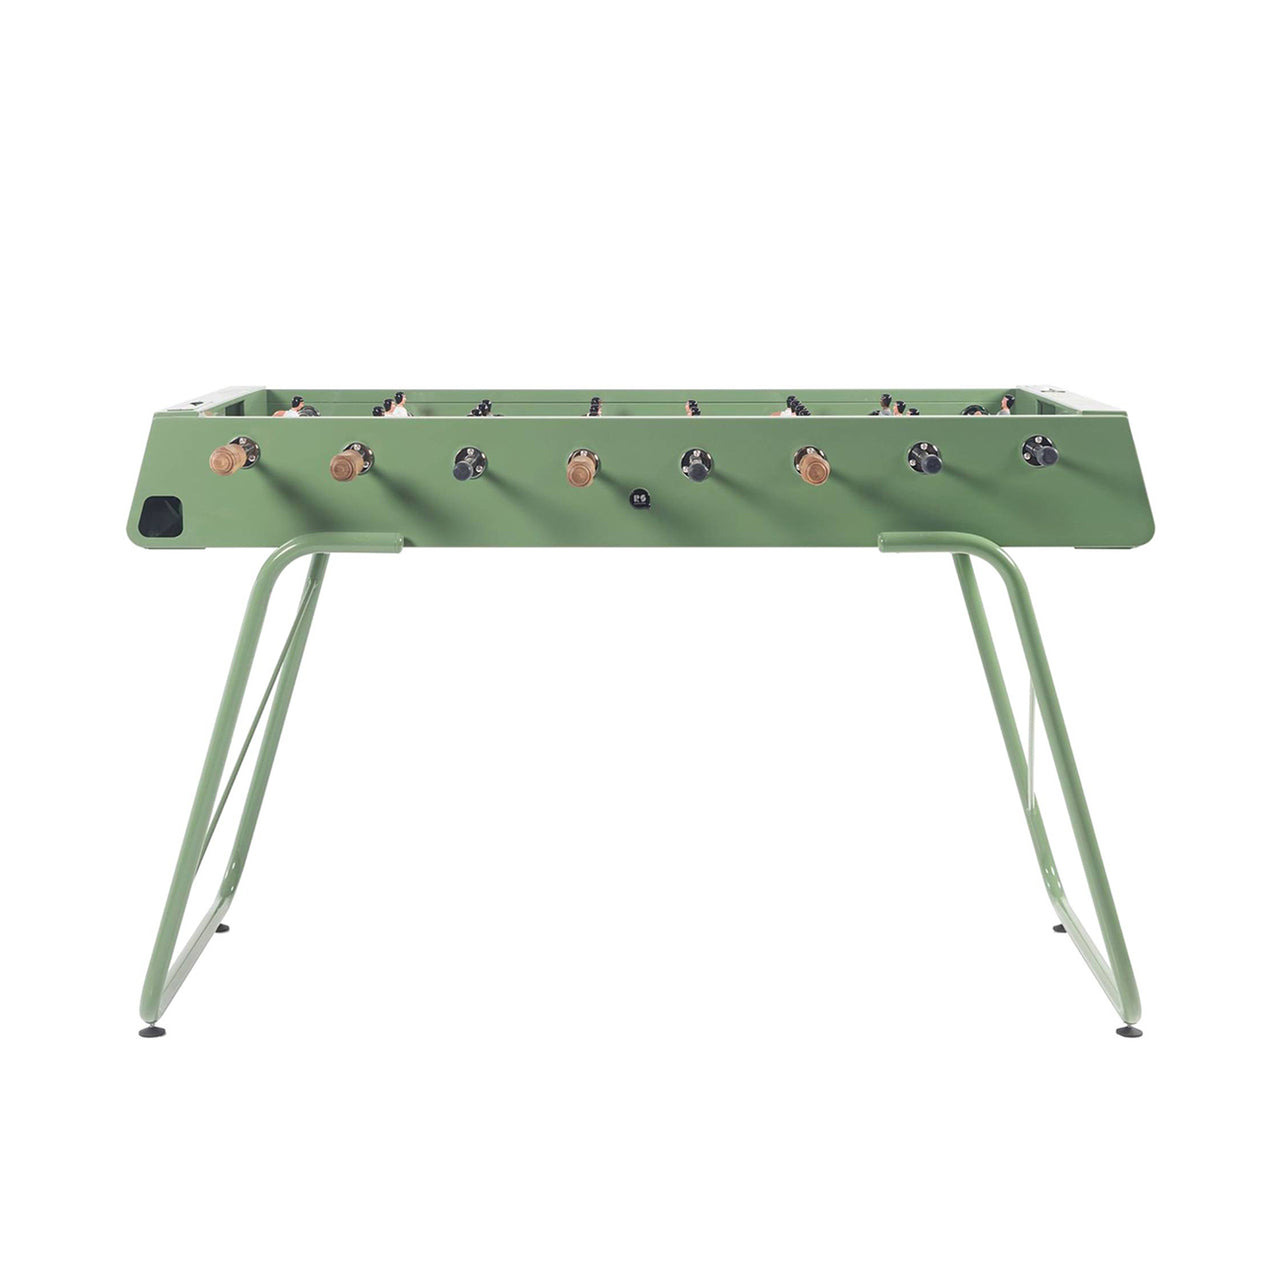 RS3 Football Table: Green